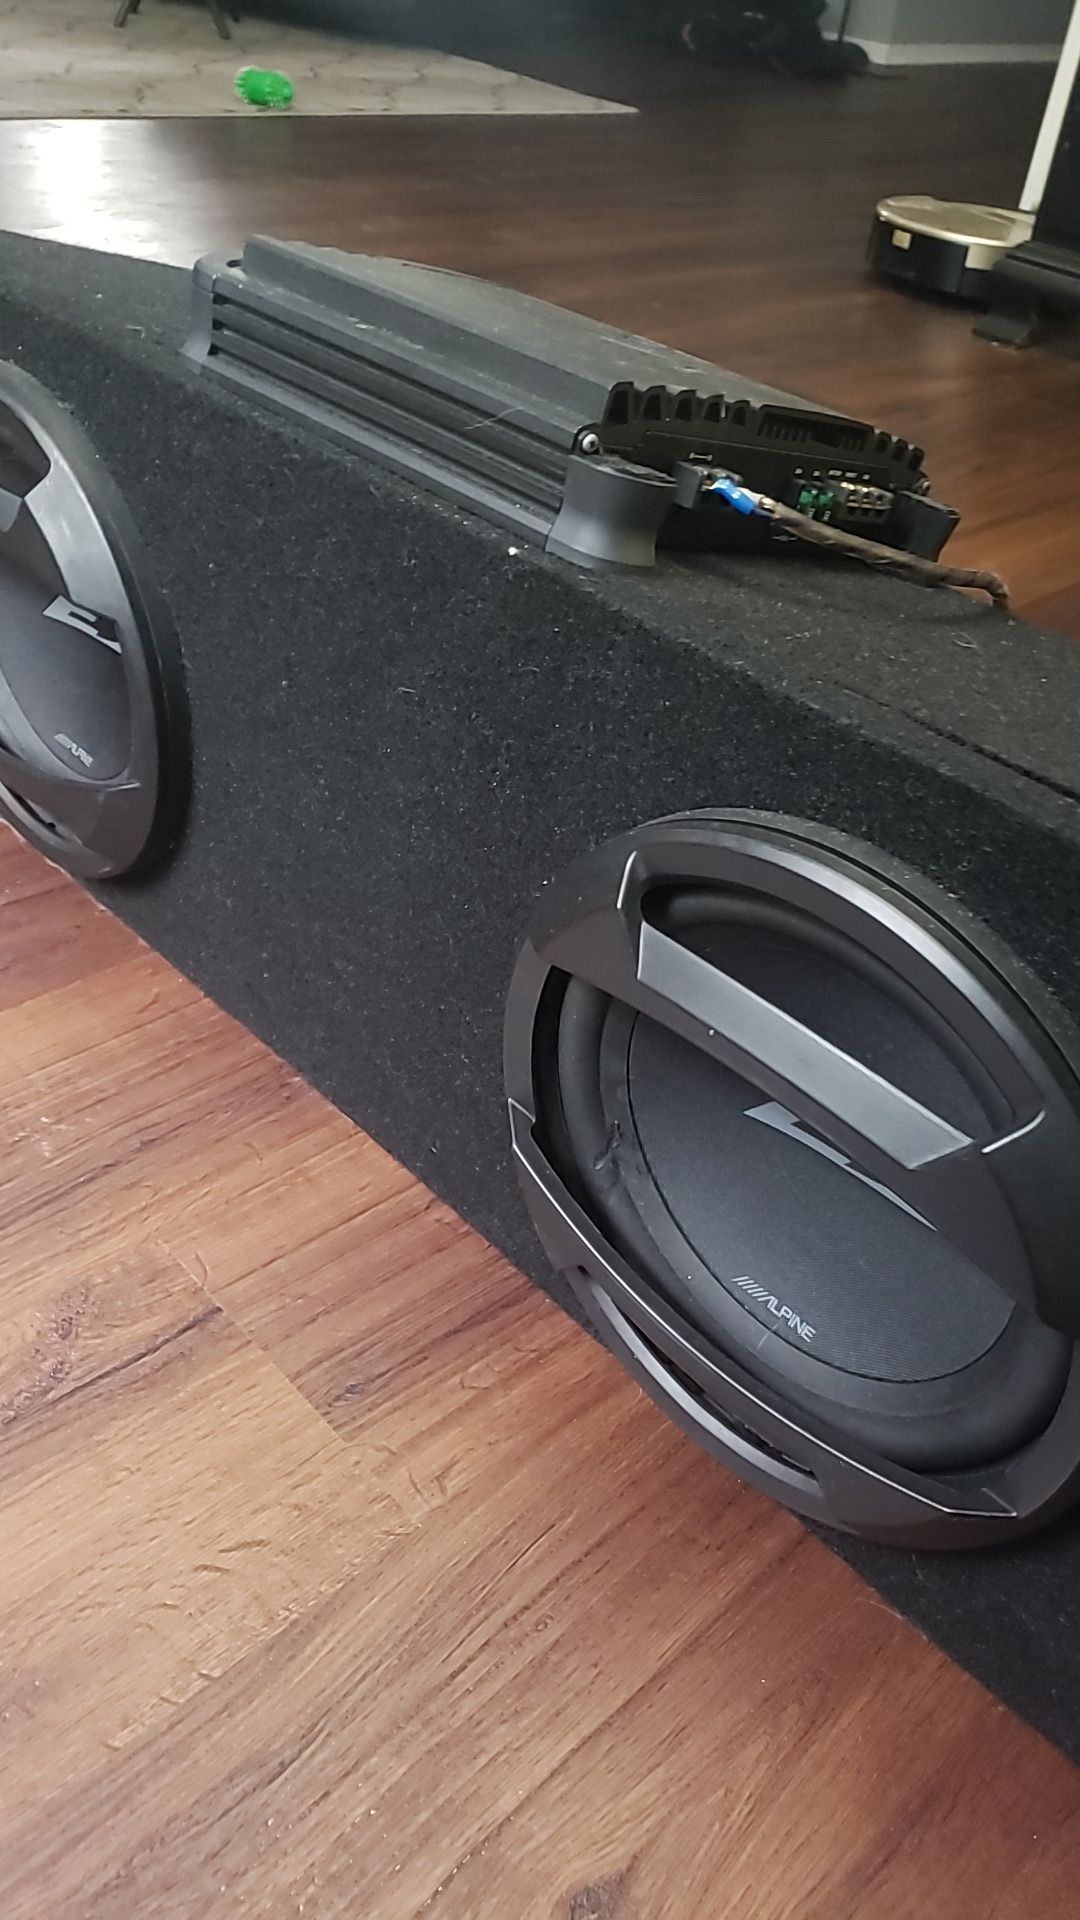 Subwoofer and amp.